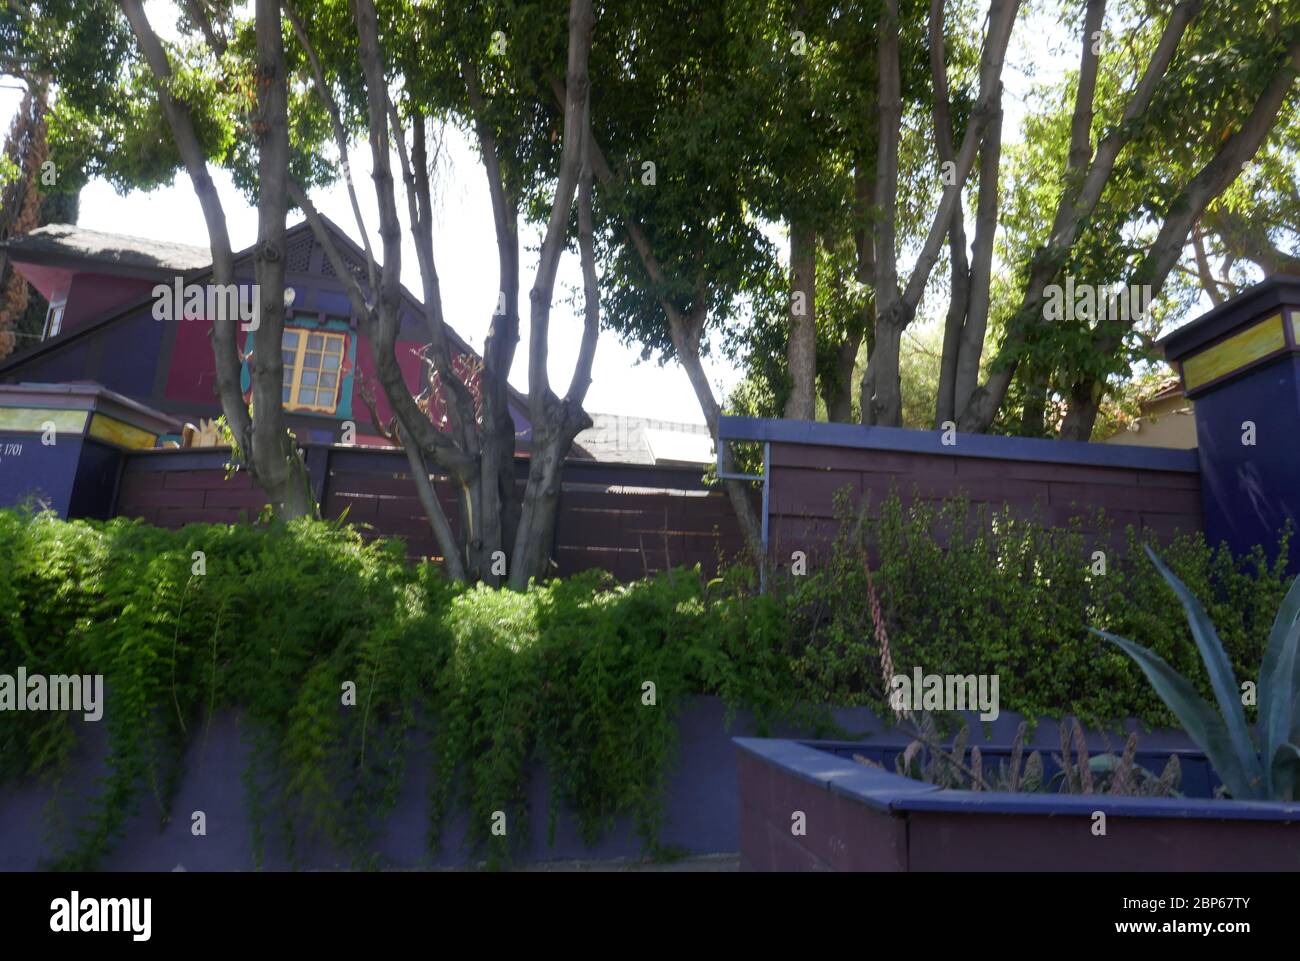 Los Angeles, California, USA 17th May 2020 A general view of atmosphere of Danny Masterson's former home at 1701 N.Orange Grove Avenue on May 17, 2020 in Los Angeles, California, USA. Photo by Barry King/Alamy Stock Photo Stock Photo